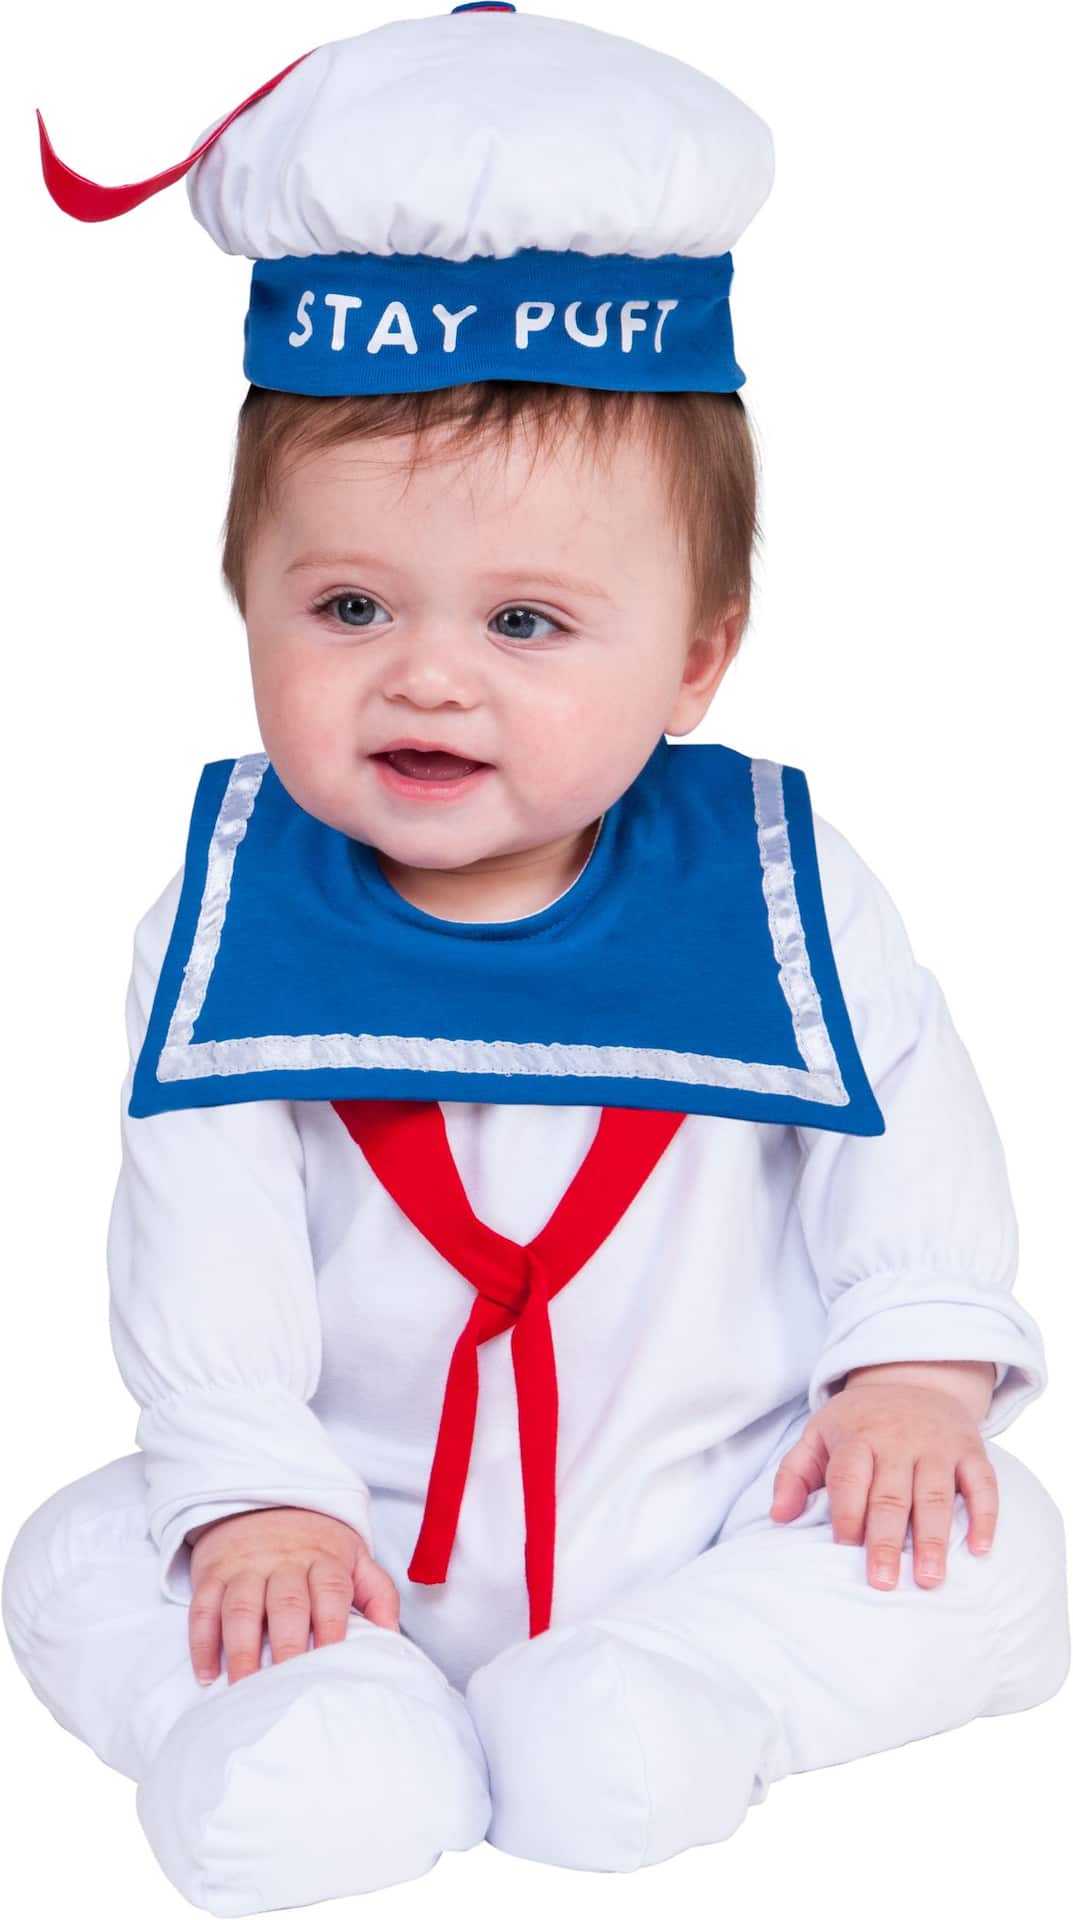 Baby Ghostbusters Stay Puft Mashmallow Halloween Costume, More Options ...